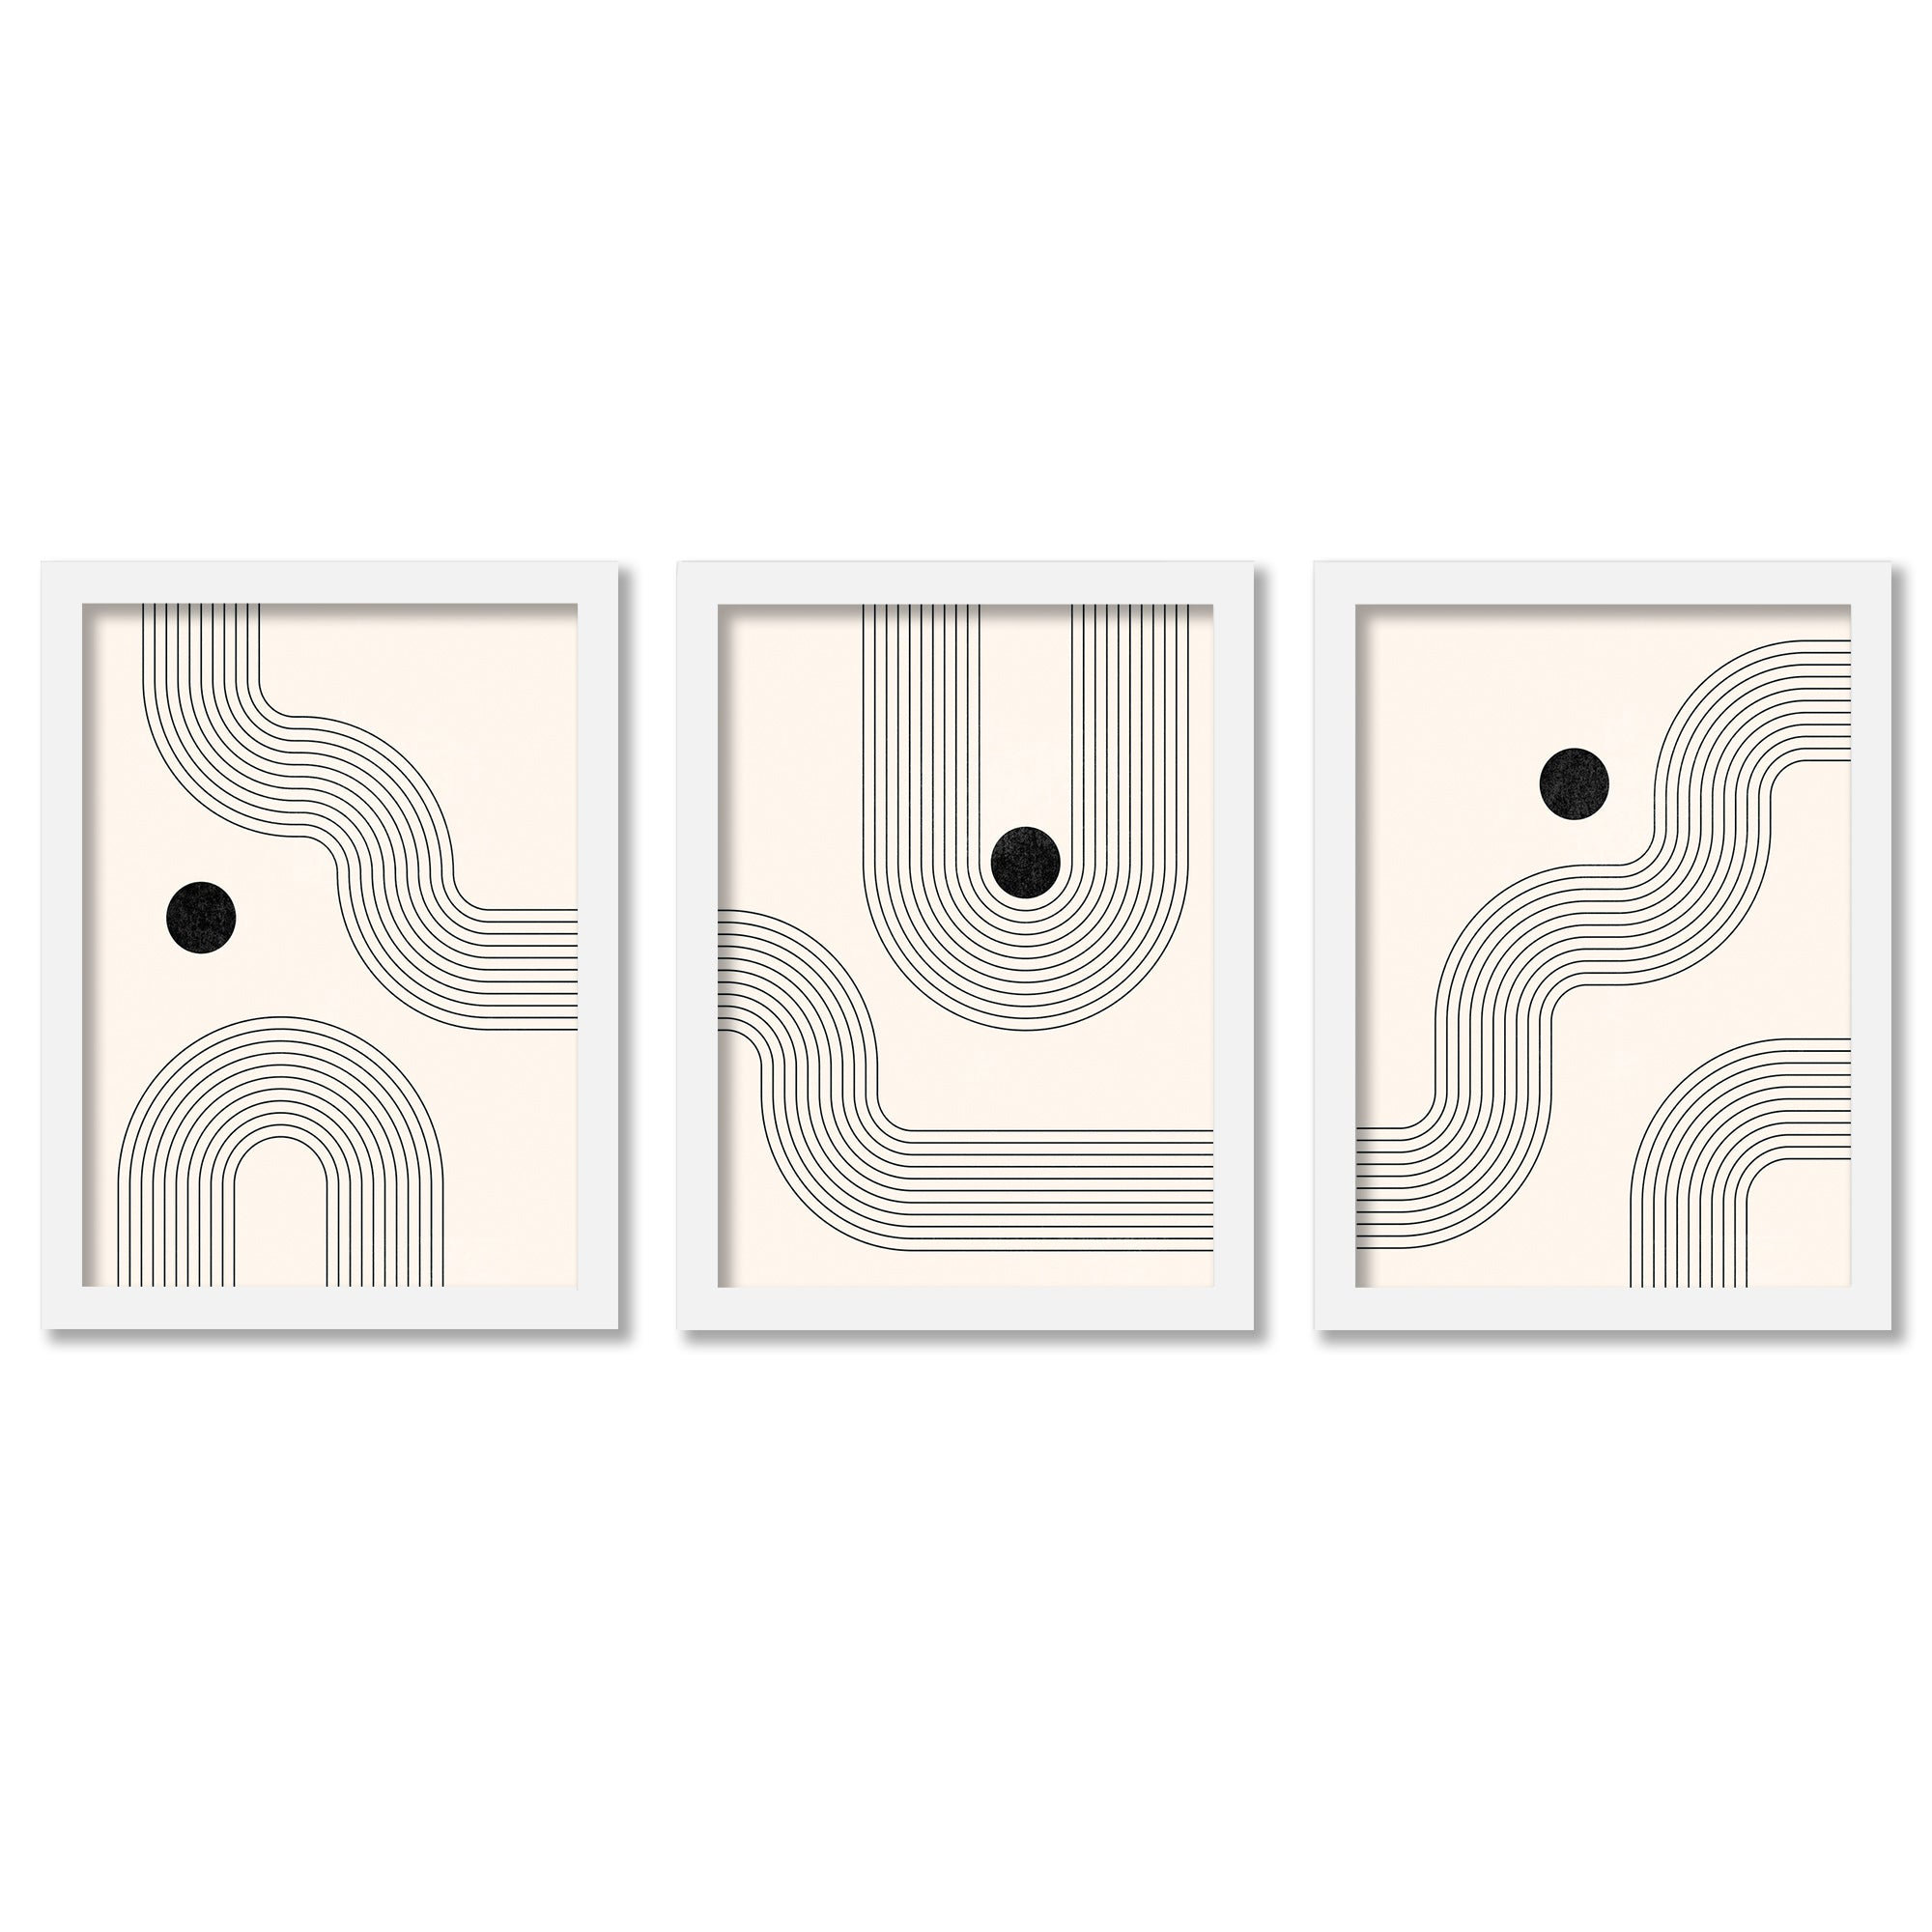 Americanflat Abstract Wall Art Room Decor - Mid Century Shapes